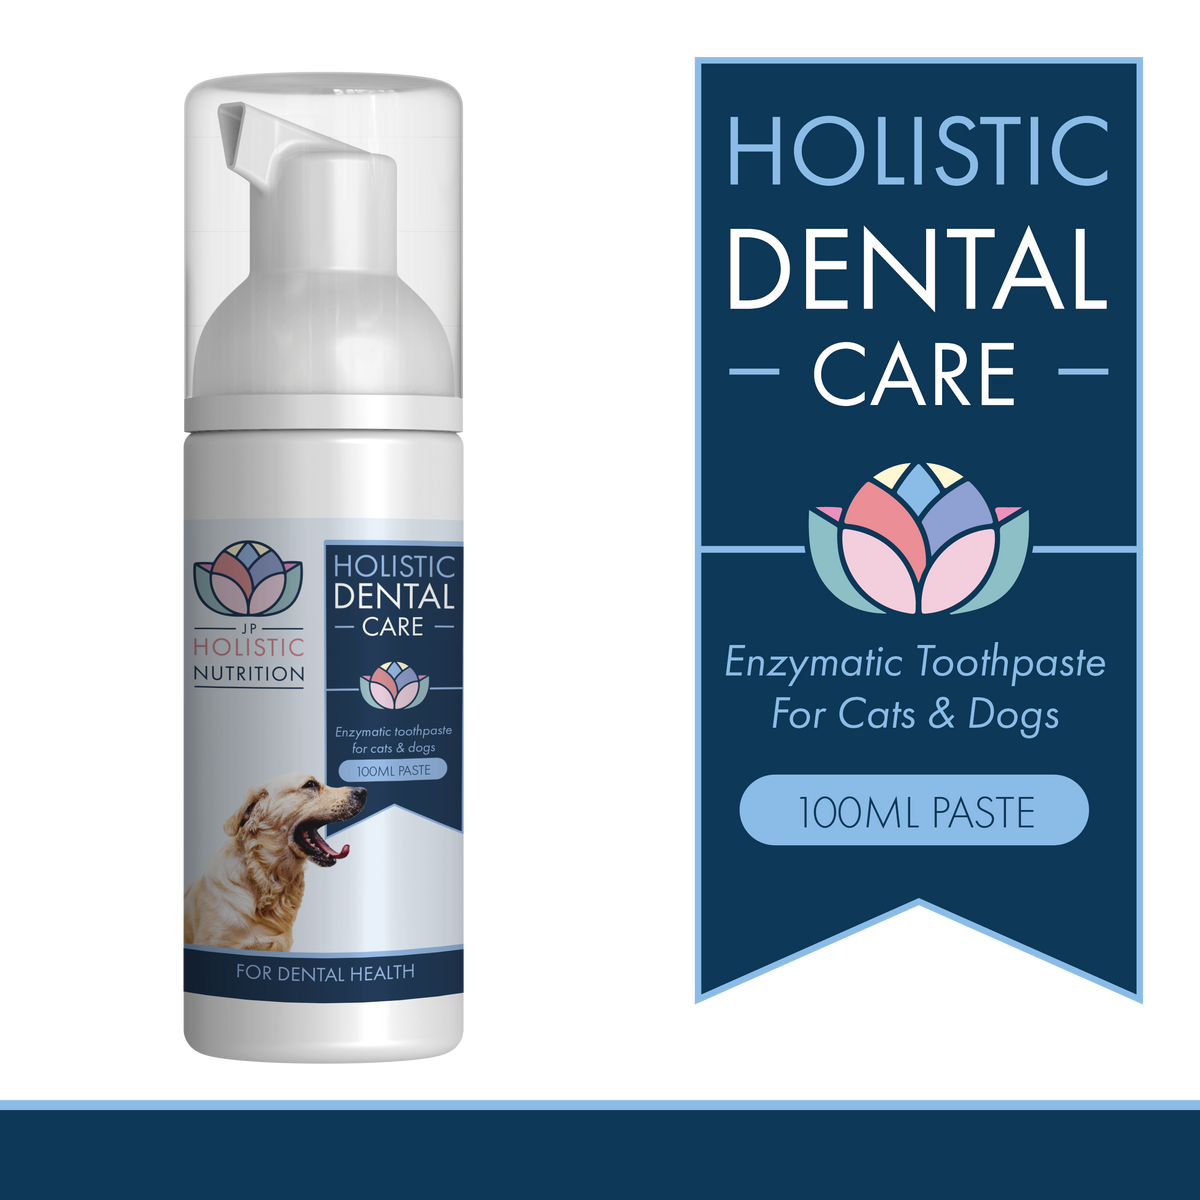 Natural Toothpaste for dogs and cats